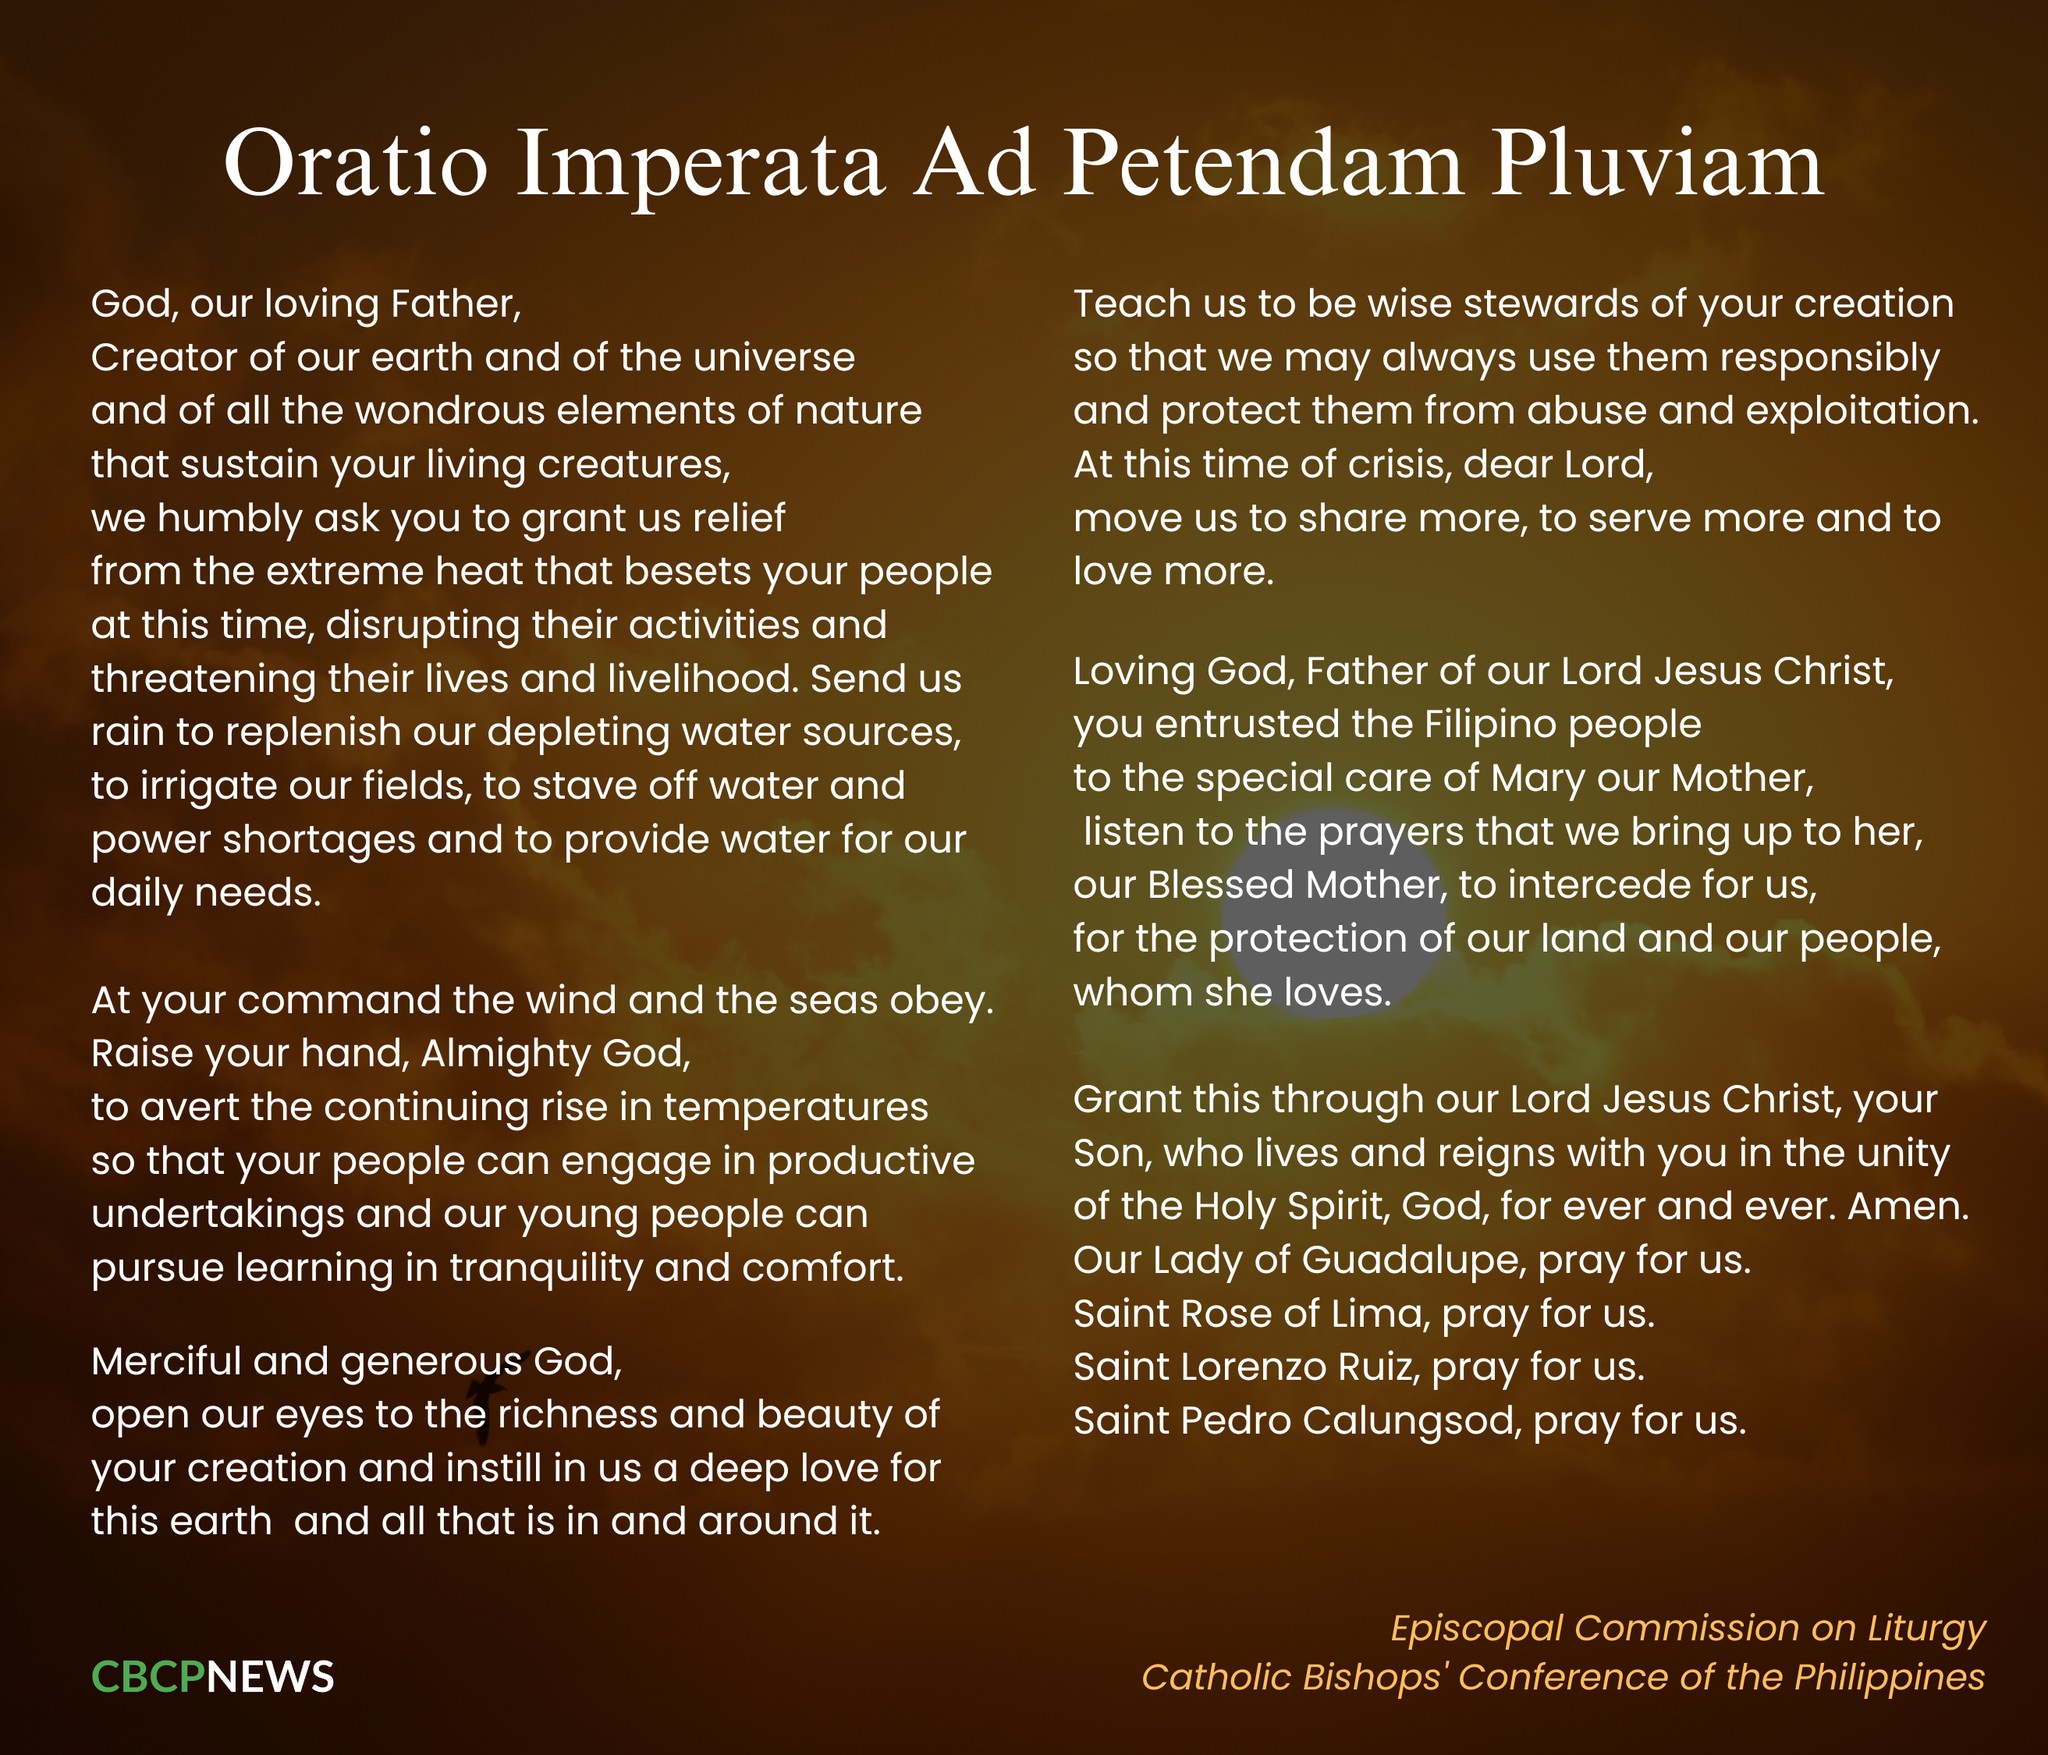 The Catholic Bishops' Conference of the Philippines Episcopal Commission on Liturgy issues Oratio Imperata Ad Petendam Pluviam (Obligatory Prayer for Requesting Rain) on Friday in a bid to counteract the extreme heat being experienced in the country.